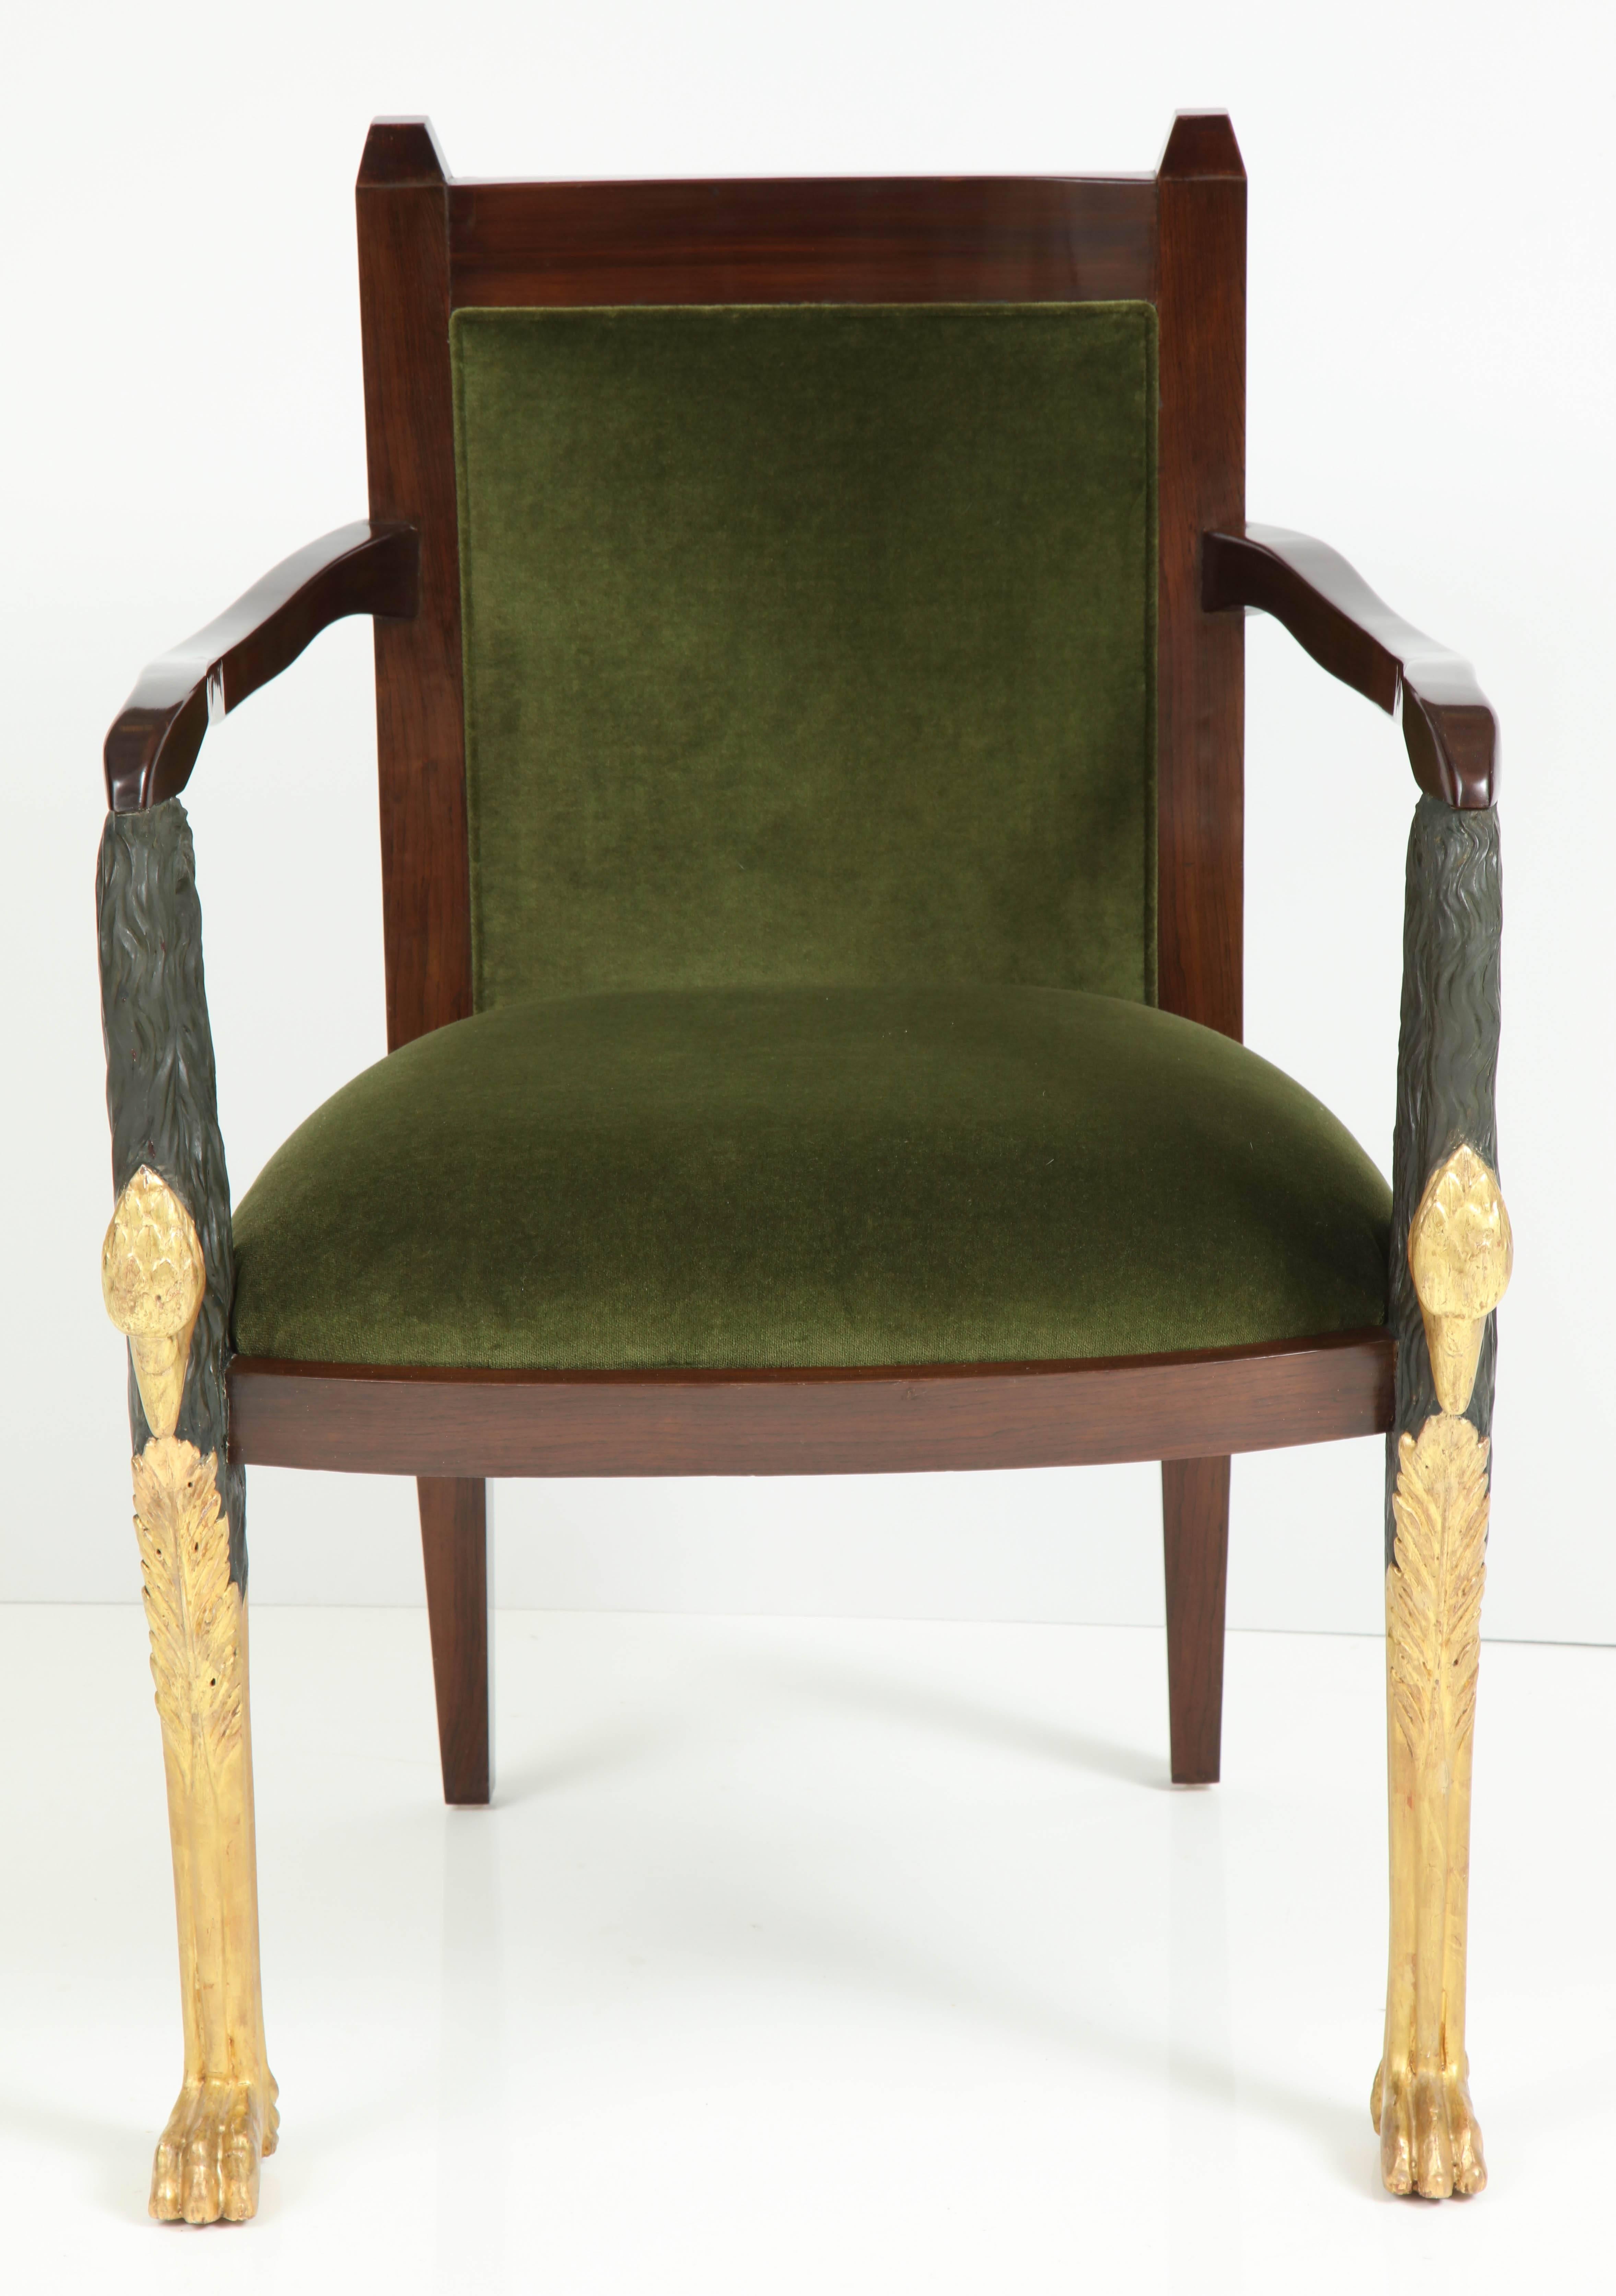 Stunning Regency style armchair featuring a Fruitwood frame with hand-carved matte ebonized plume body details and traditional 22-karat gilded parcel gilt detail on stylized heron heads at arm fronts and legs. Mint restored with new Moss Green